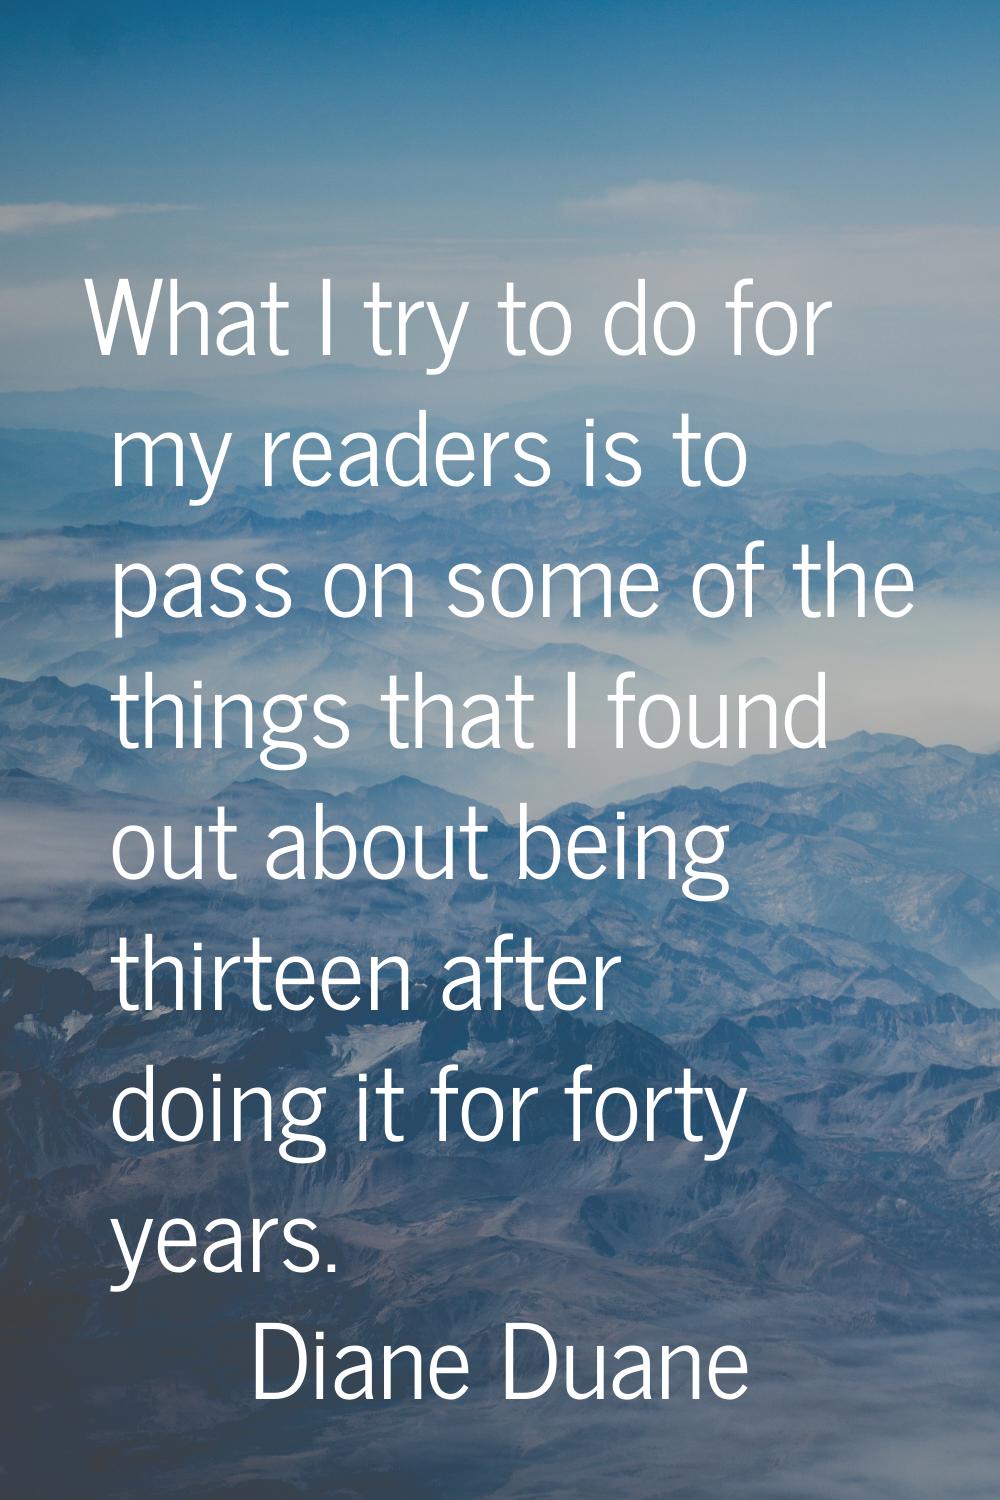 What I try to do for my readers is to pass on some of the things that I found out about being thirt